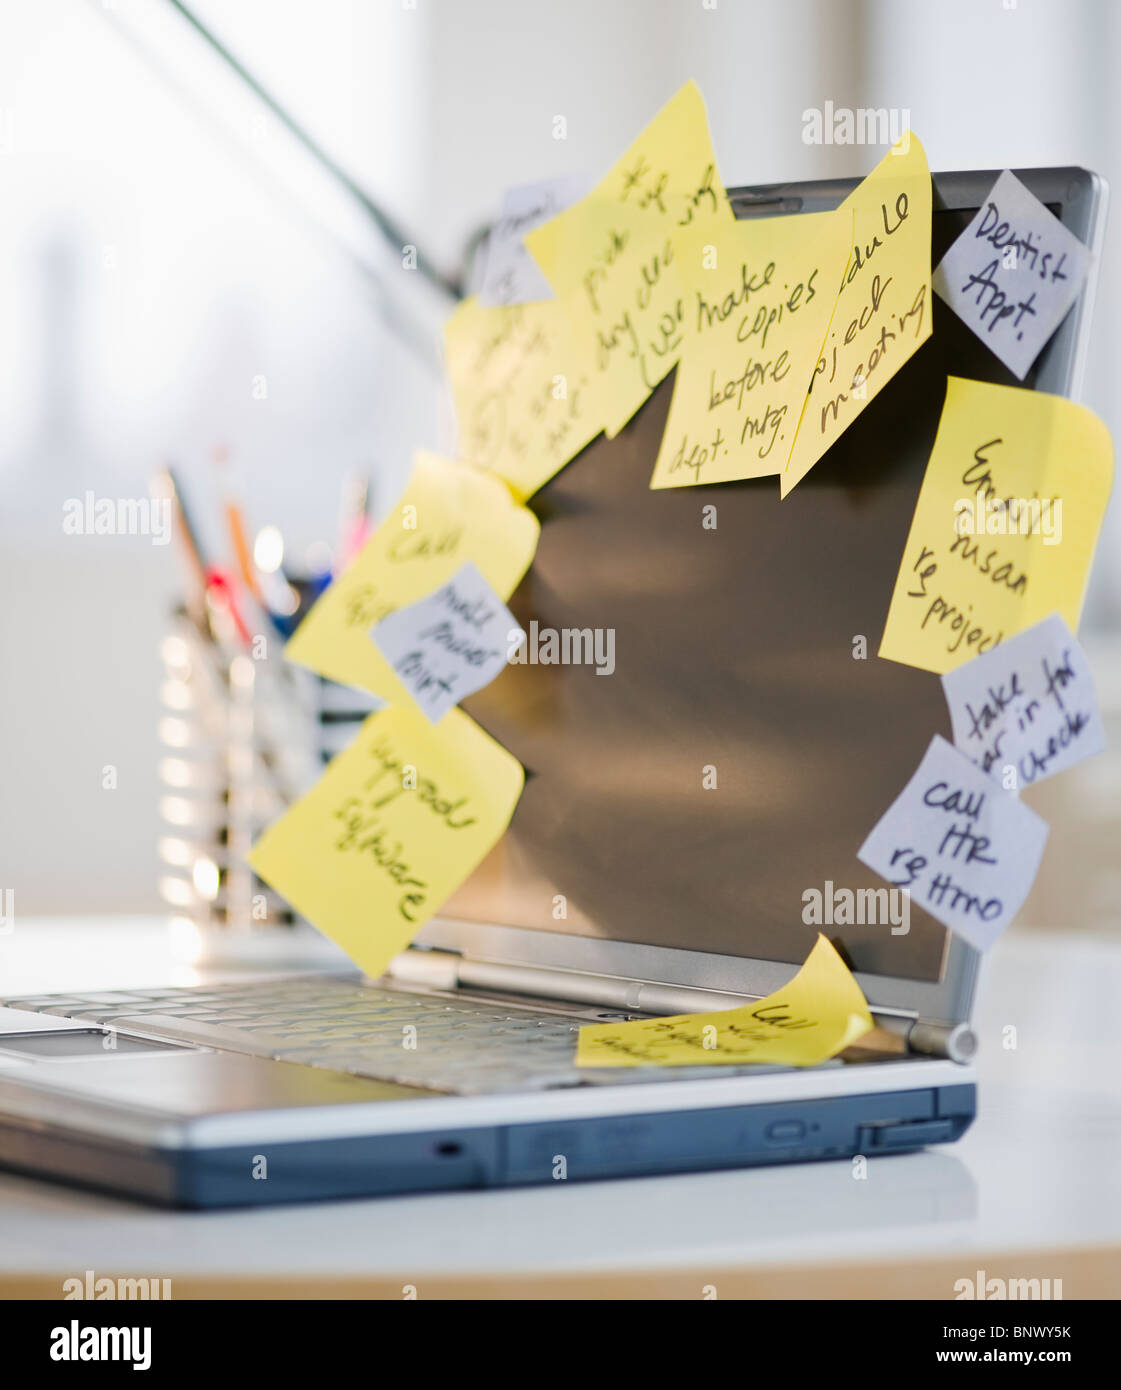 To-do notes stuck to laptop Stock Photo